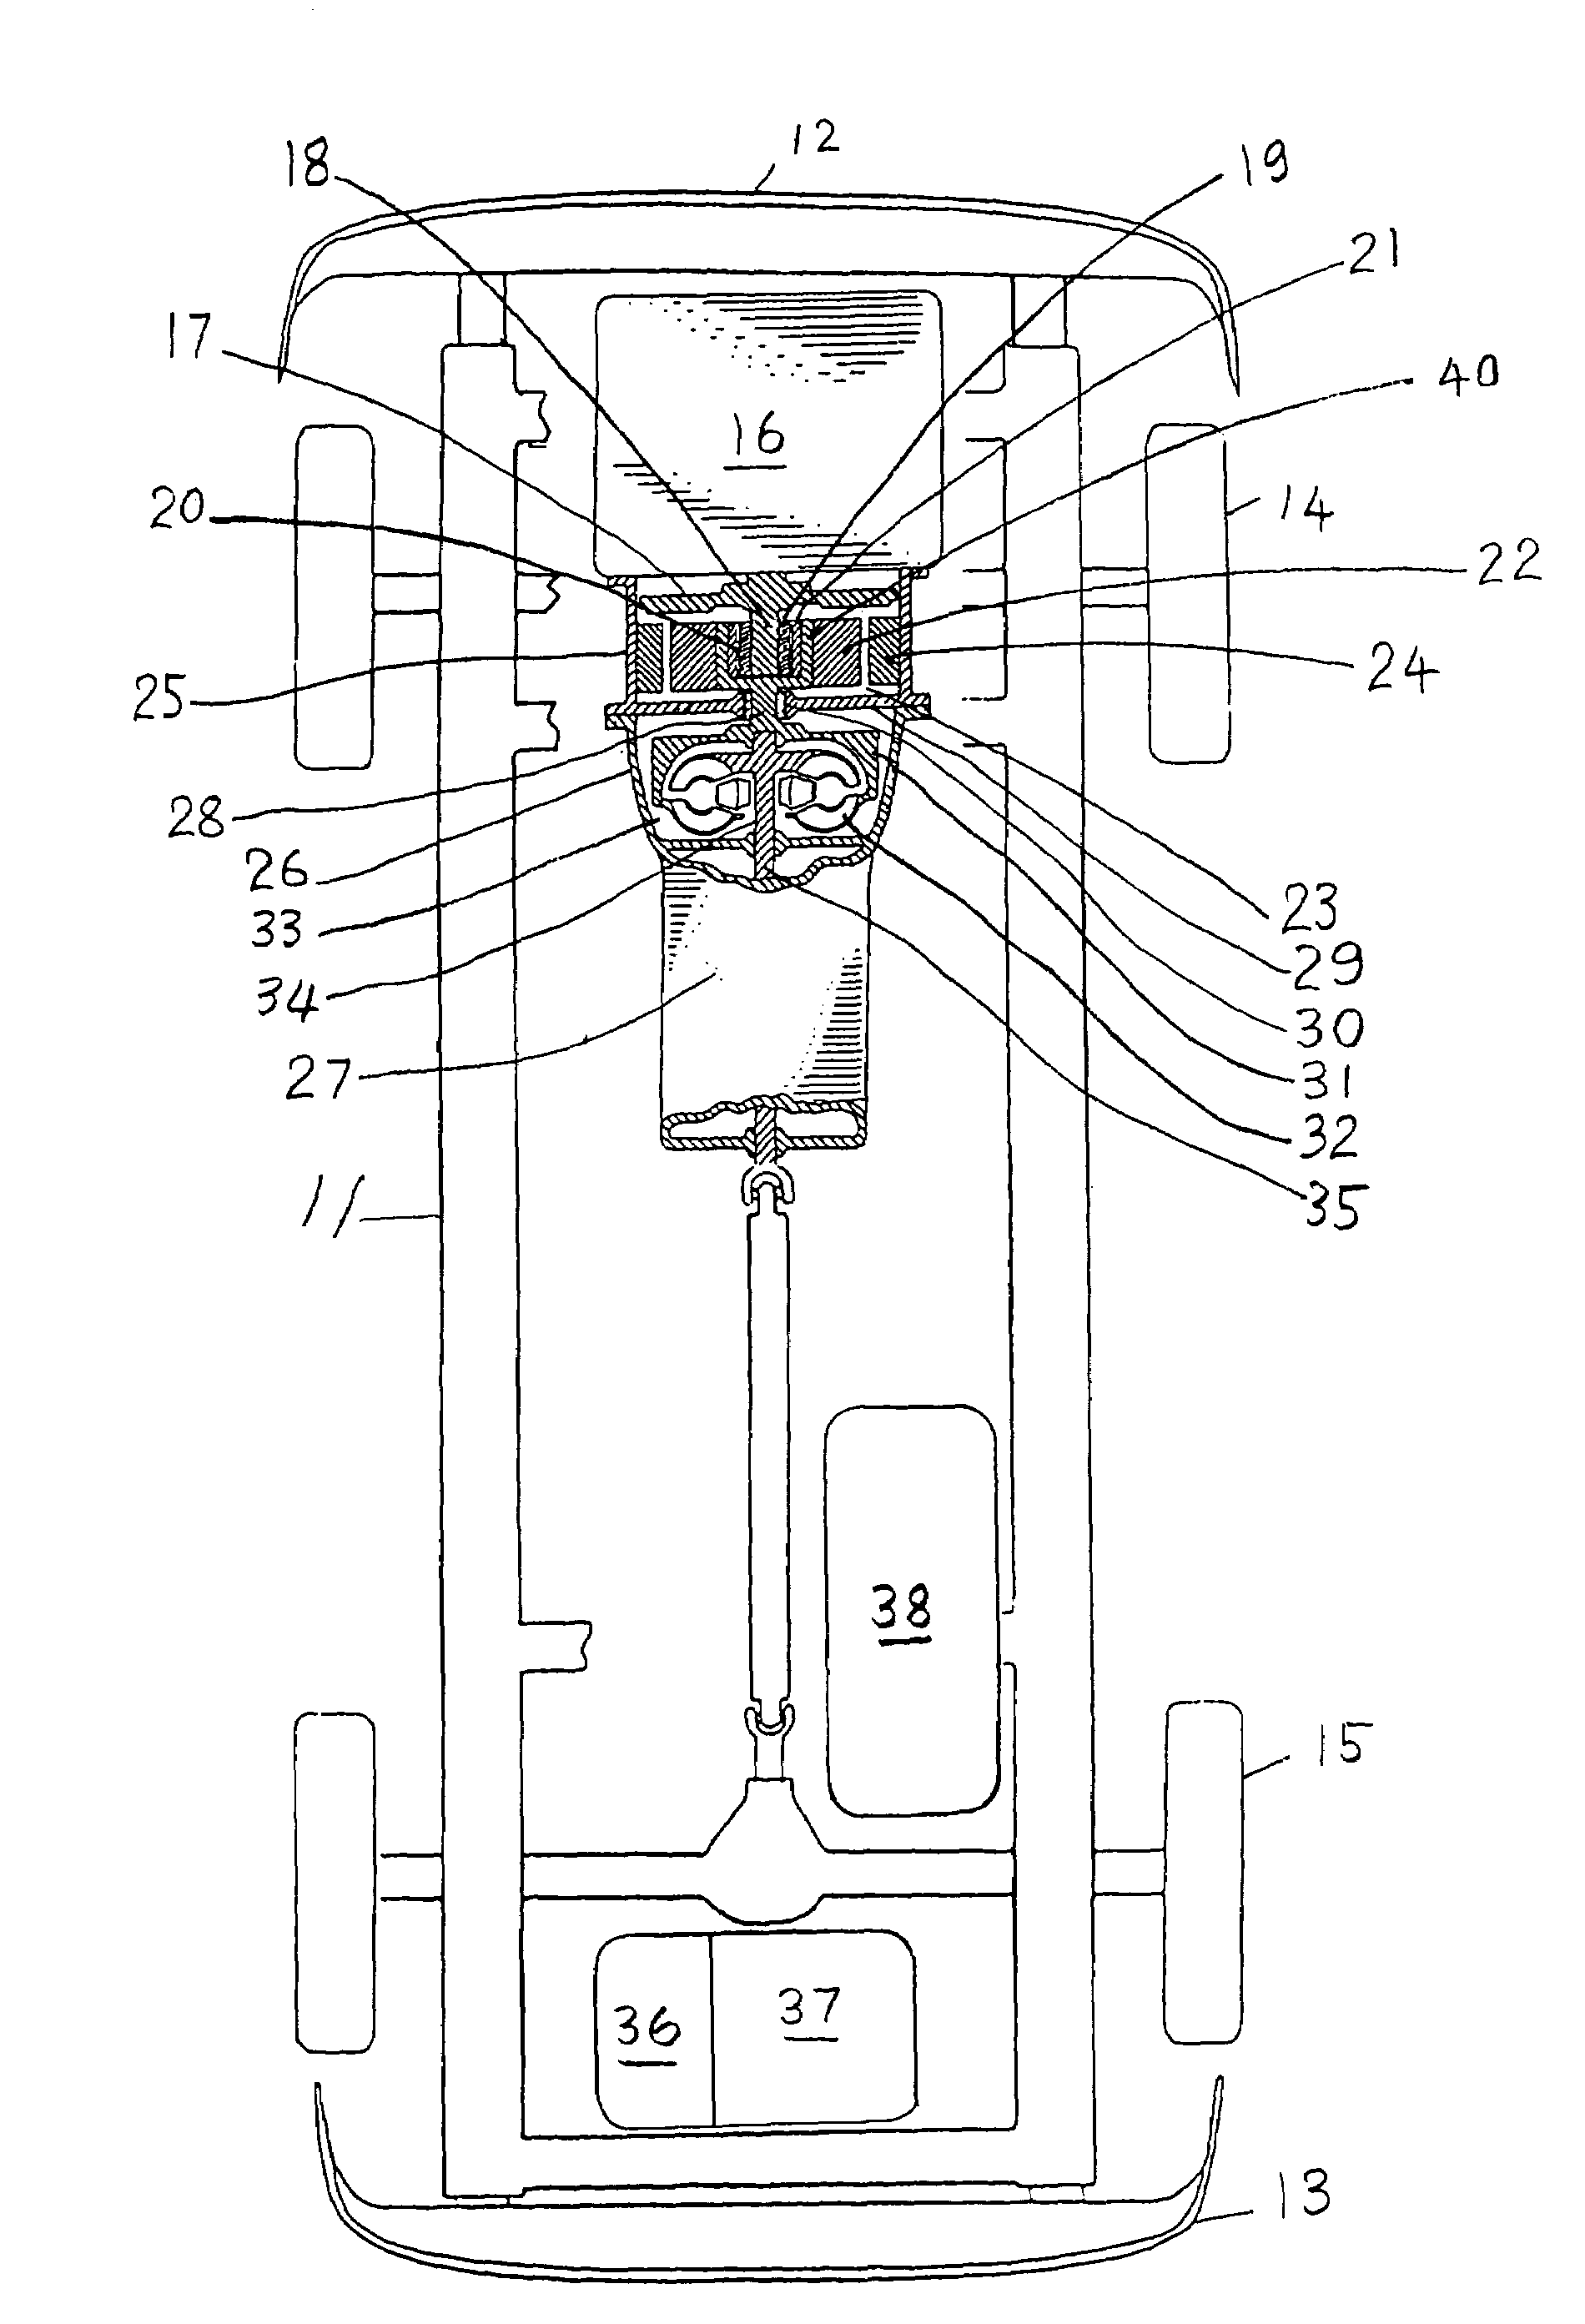 Hybrid vehicle having an electric generator engine and an auxiliary accelerator engine